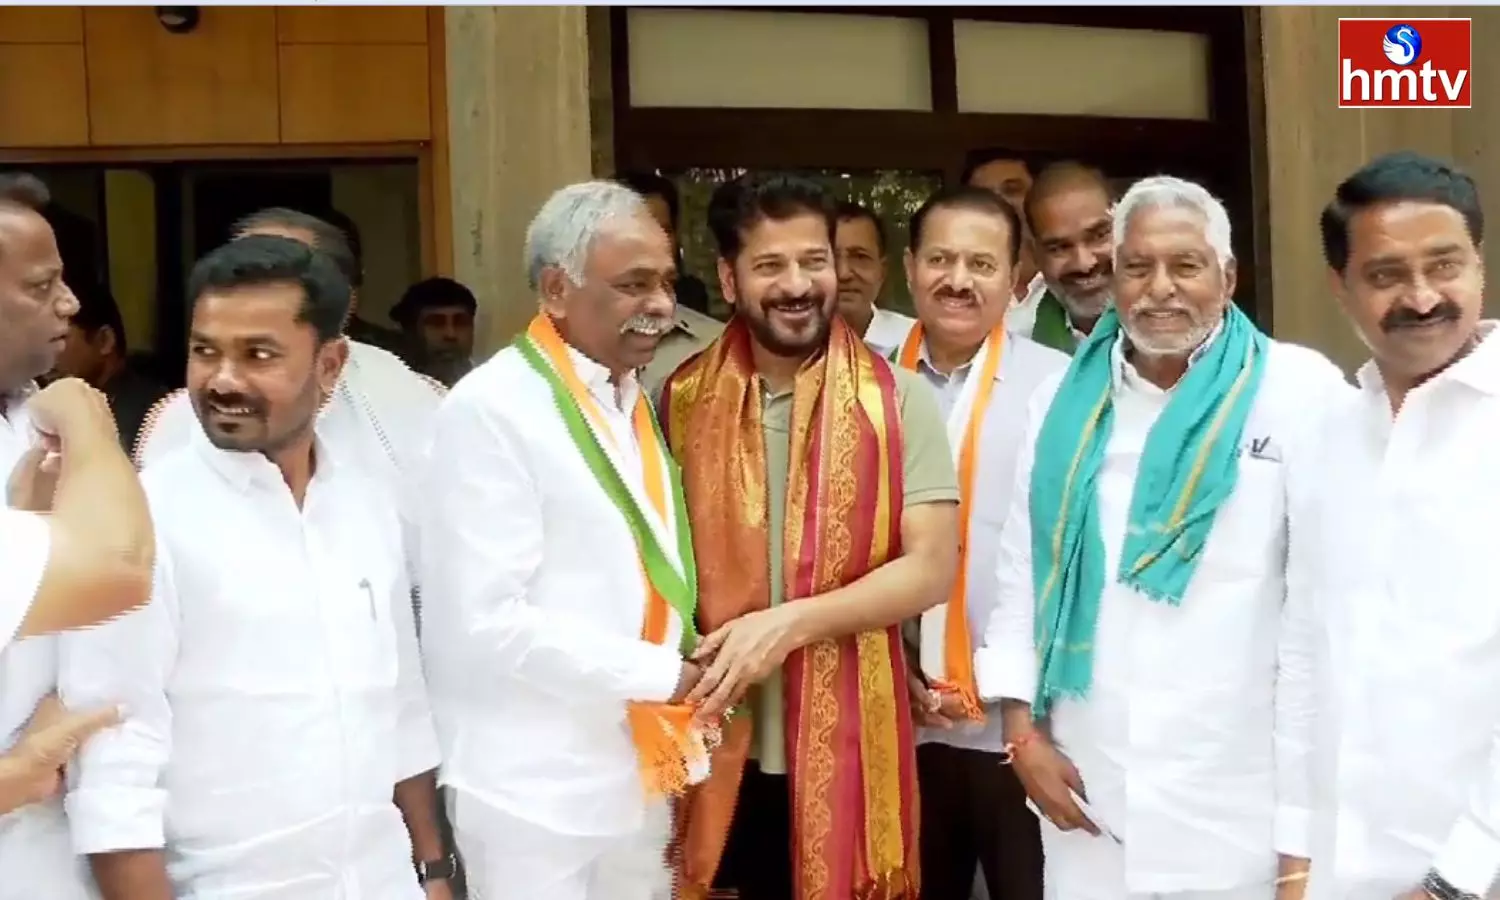 Leaders joined the Congress in the presence of Revanth Reddy